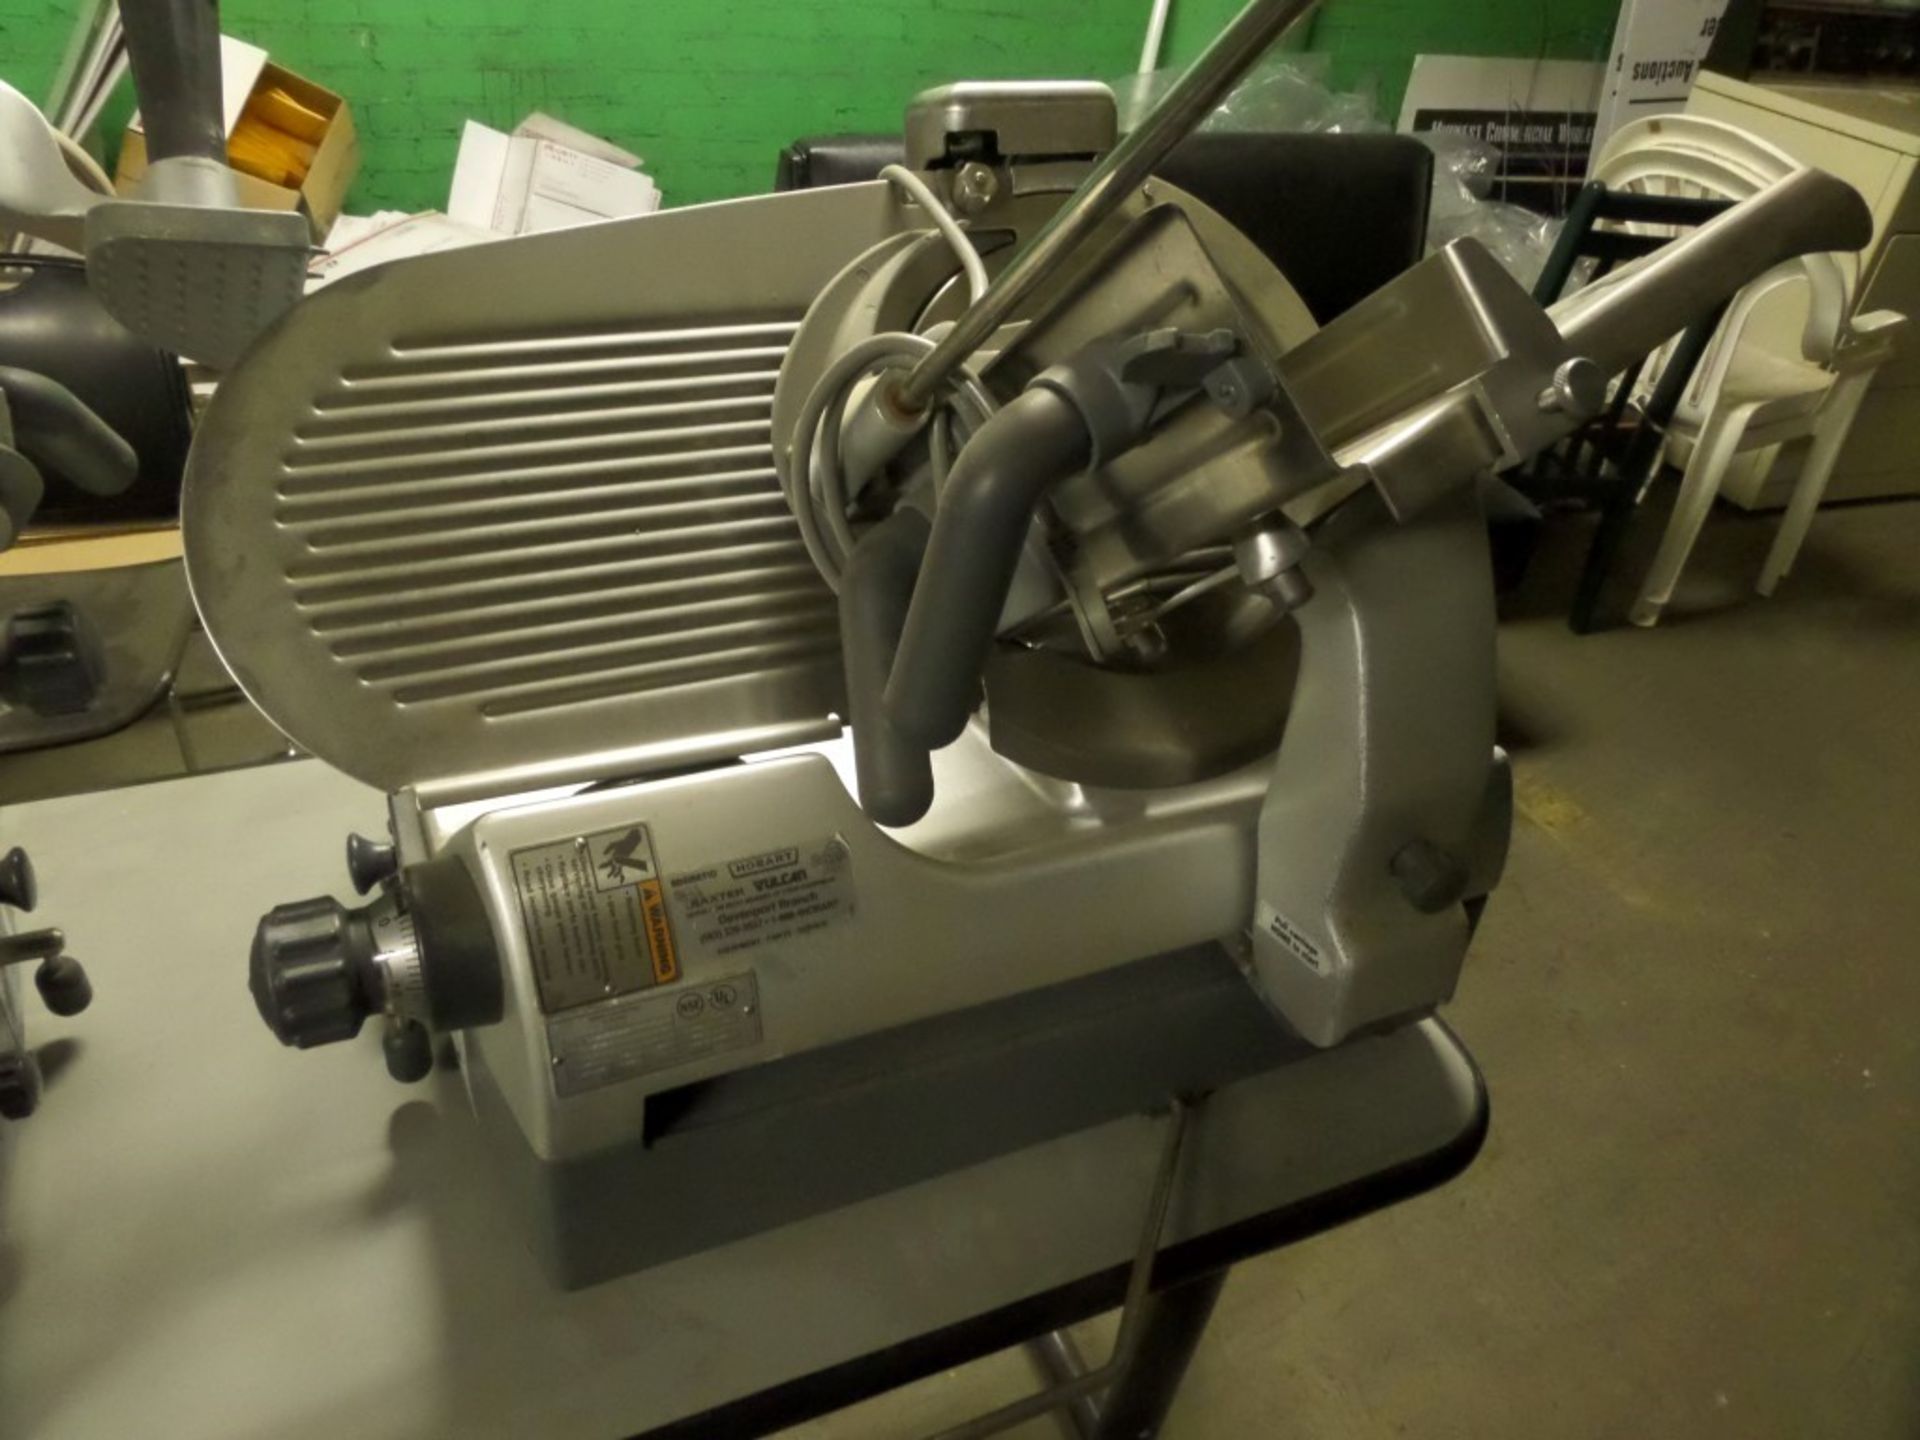 Hobart 2912 Automatic Meat Slicer - Tested Works